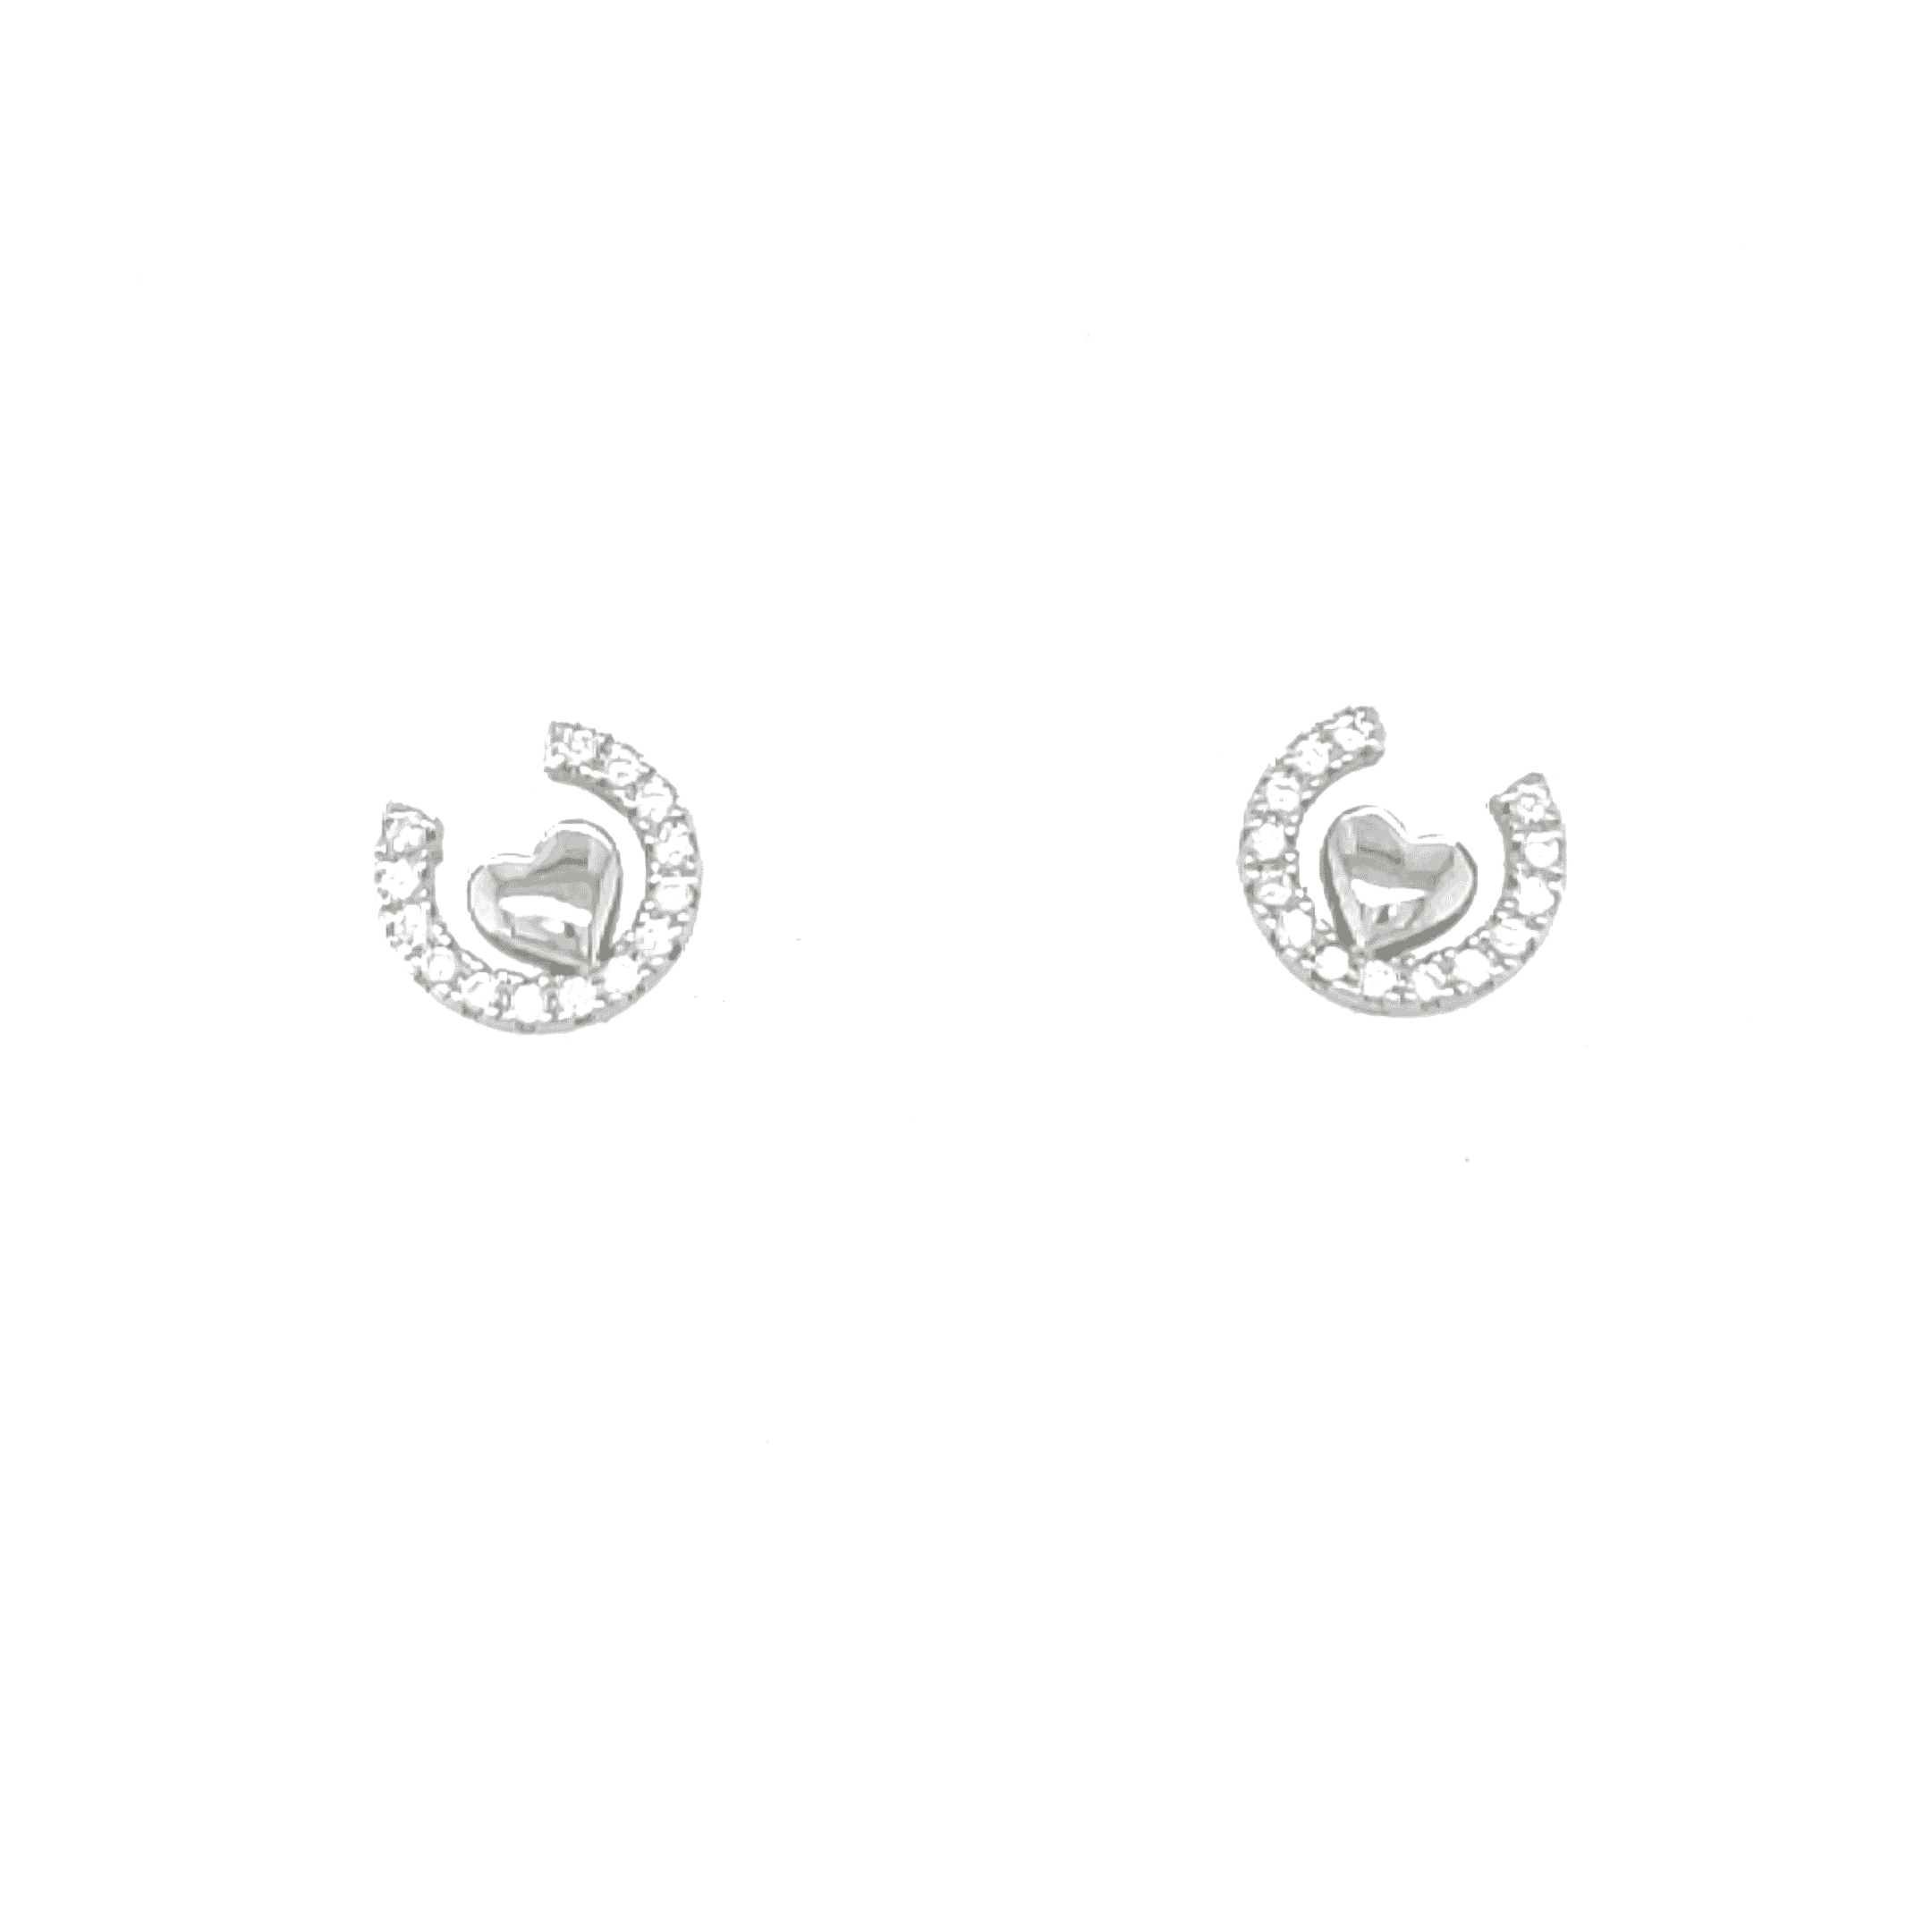 Asfour rounded Zircon Stone Silver 925 Earring - ER0173